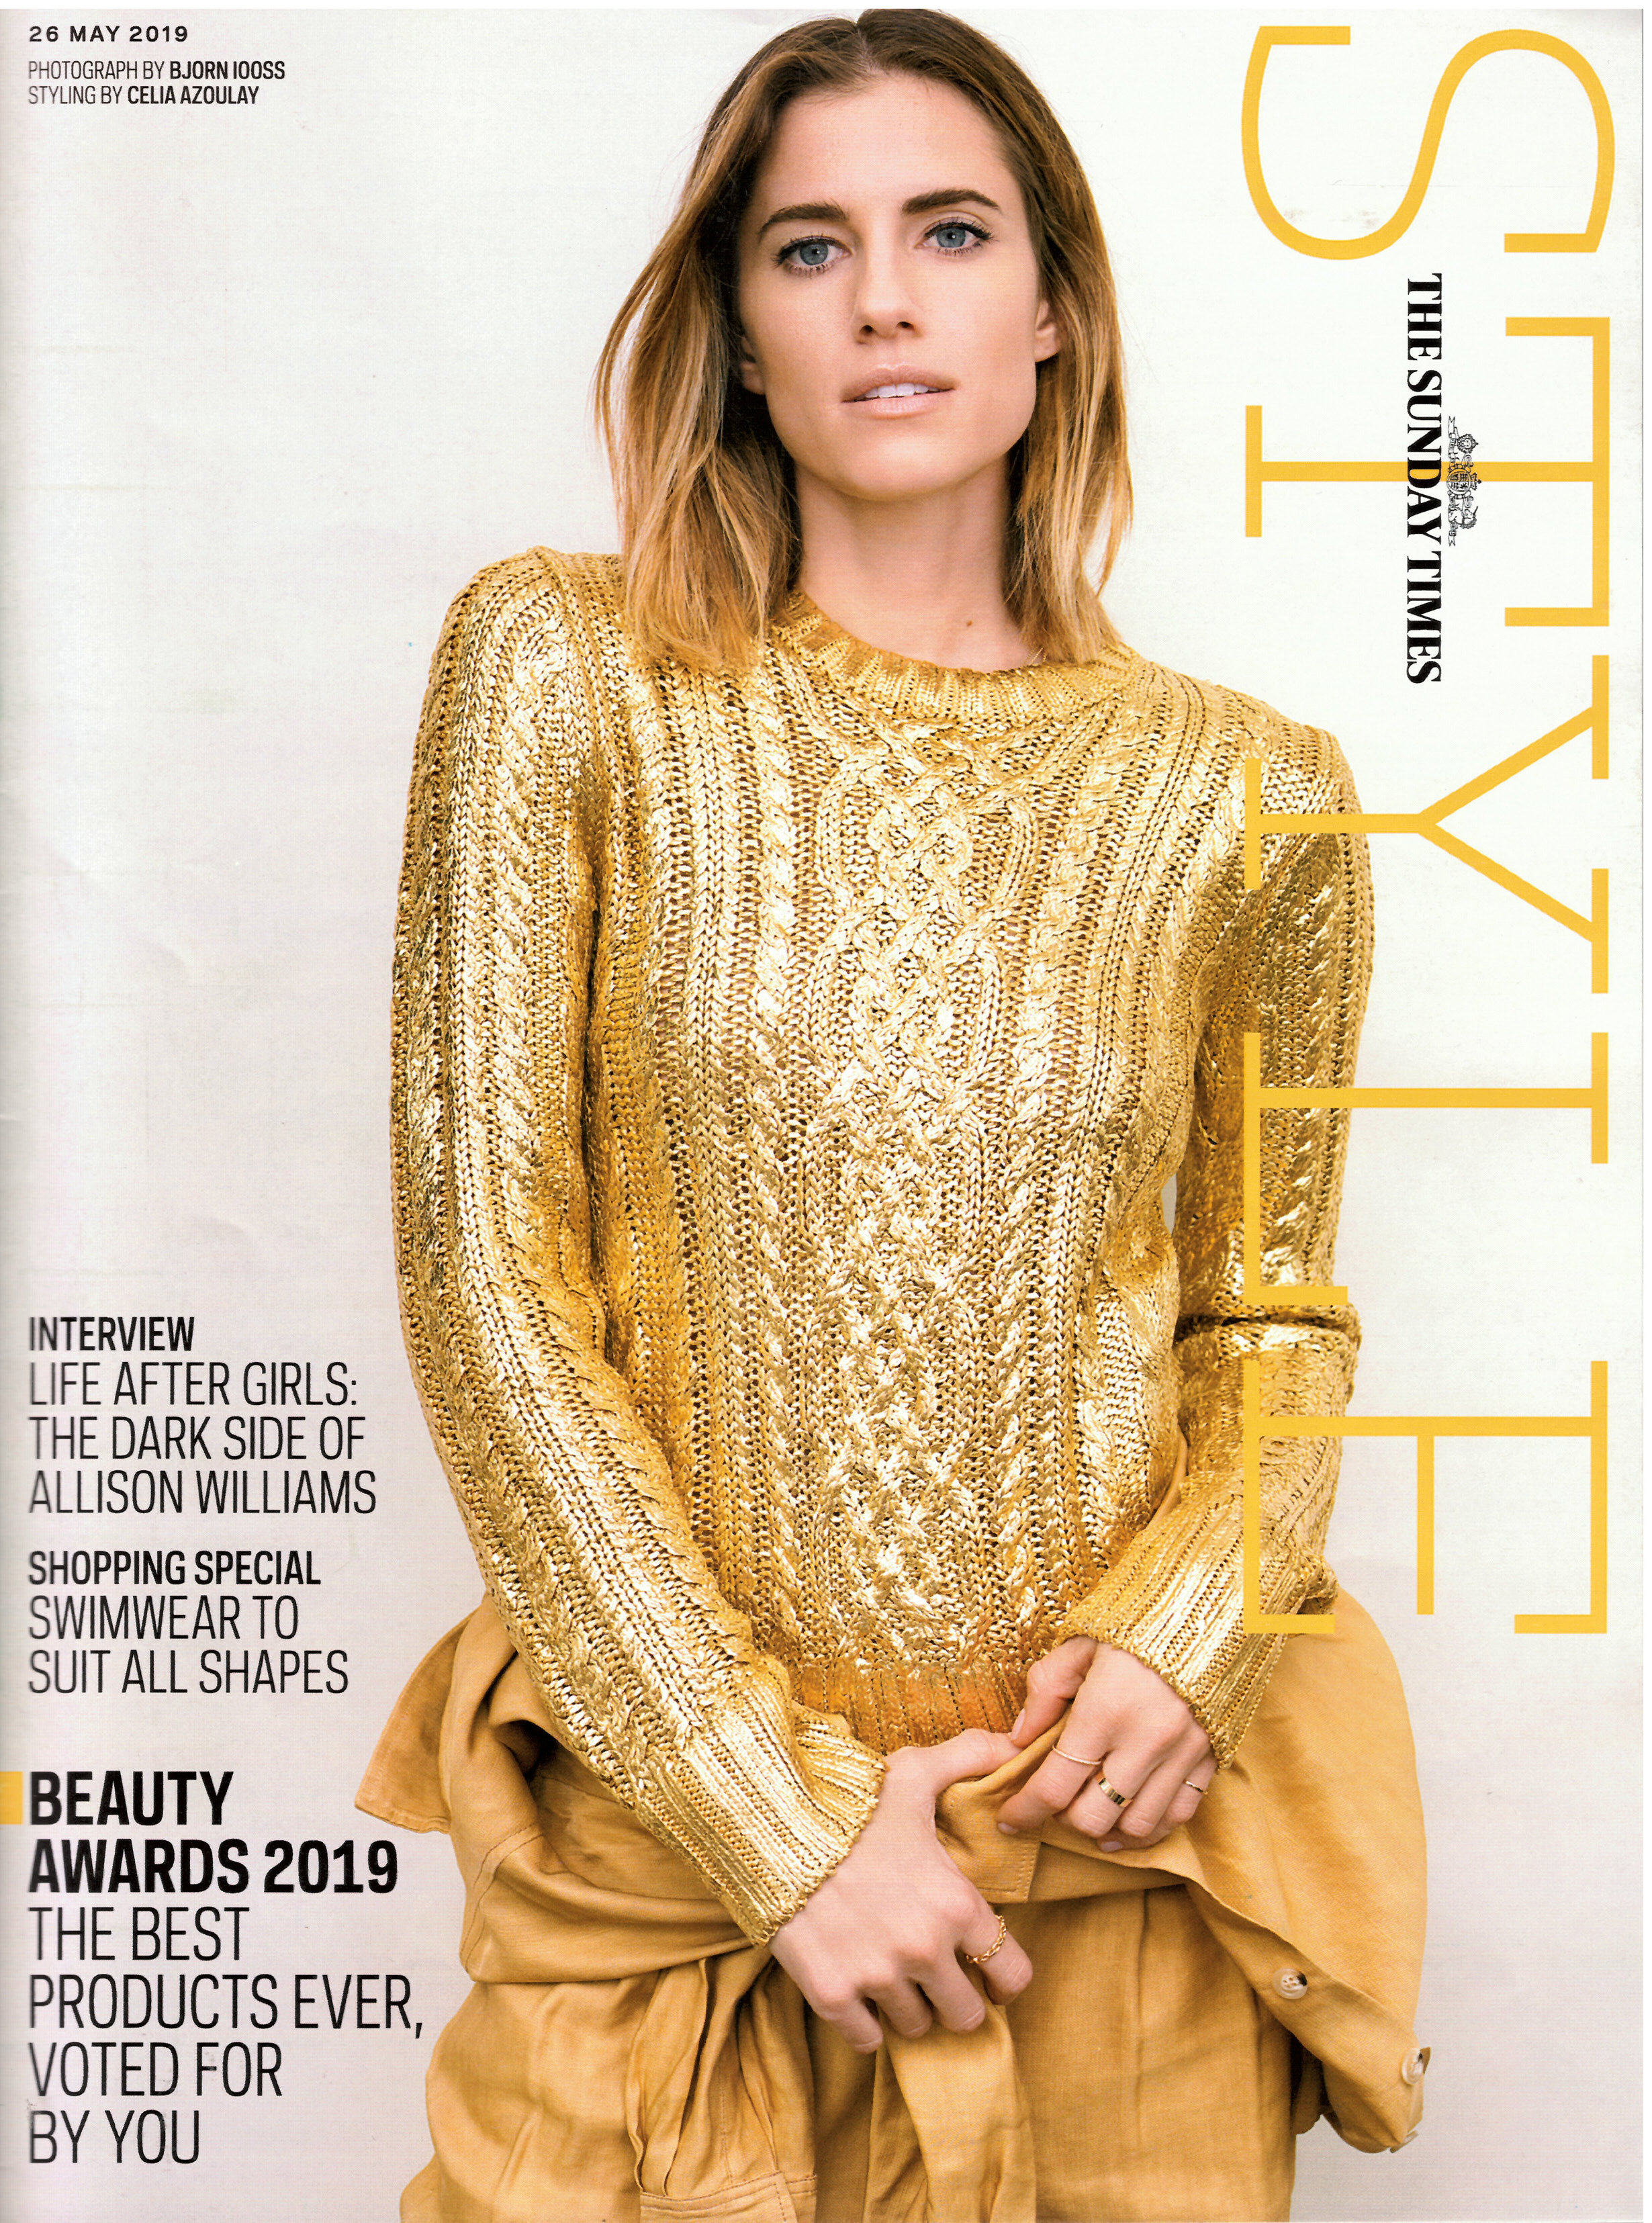 MG_TheSundayTimesStyle_UK_MAY262019_CD_W_CollectionSpring2019_Sweater_AllisonWilliams_Cover.jpg